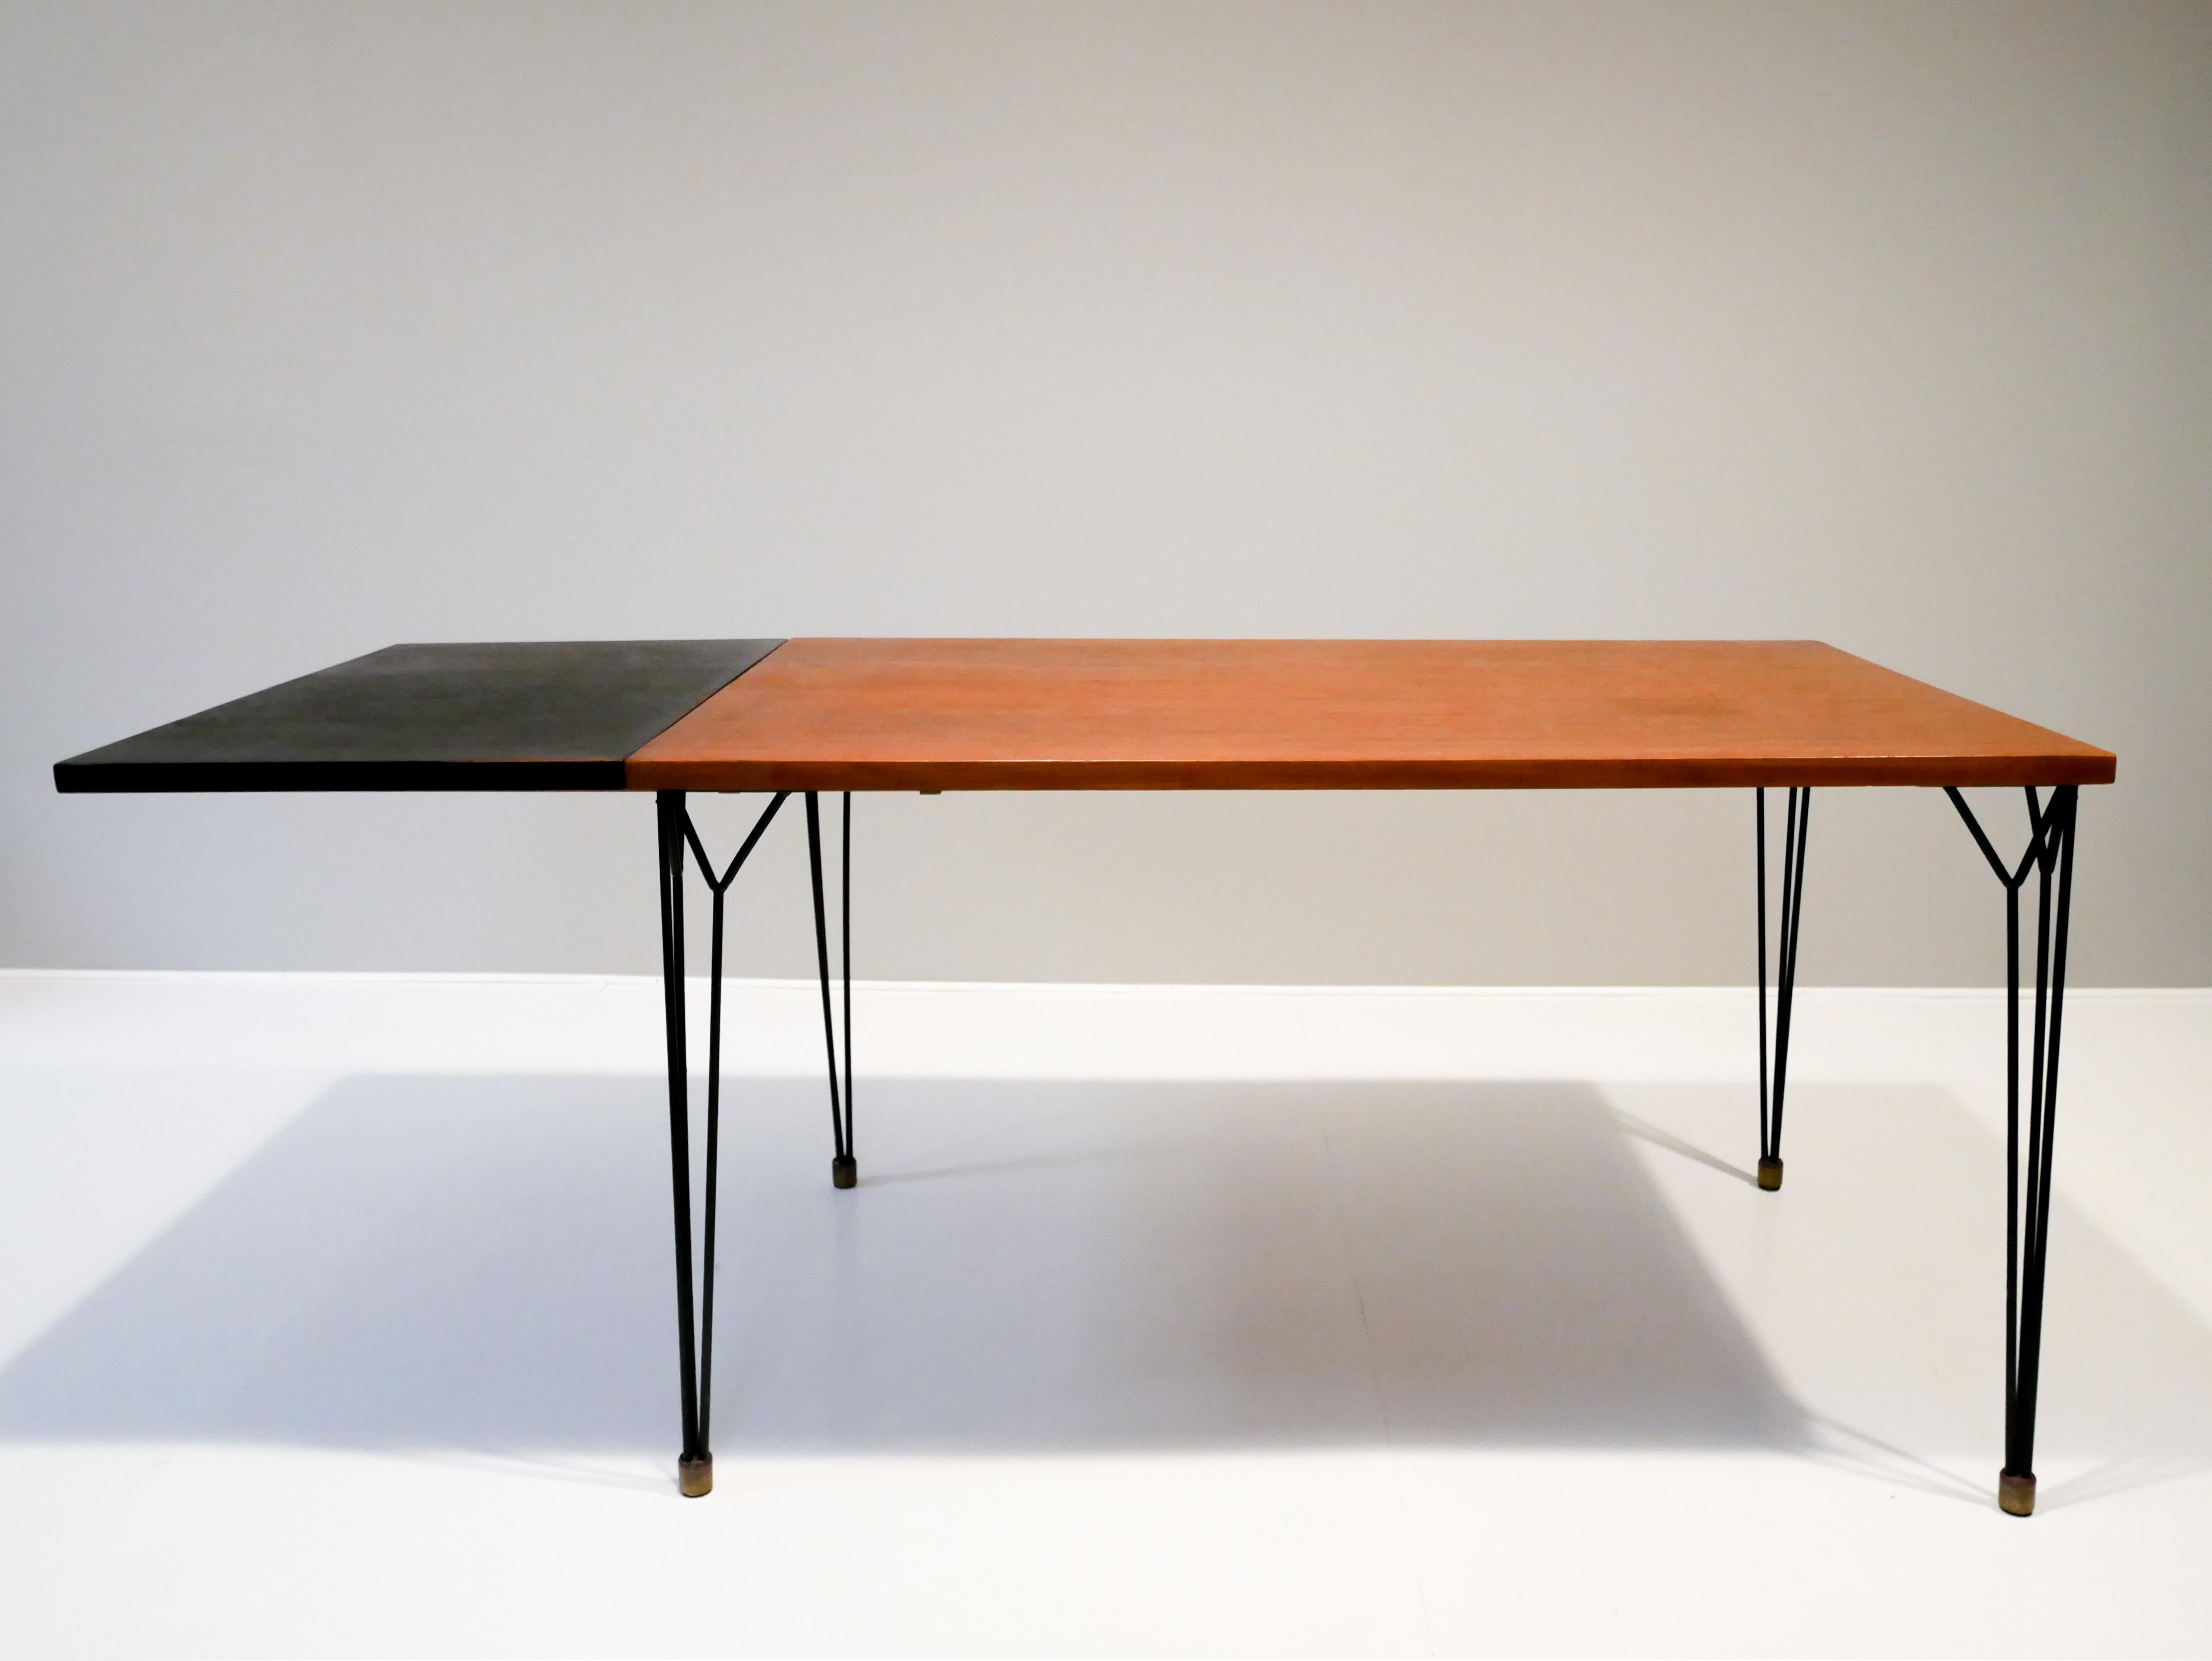 Very rare Nisse strinning dining table in teak and blackened extending leaf.
Dimensions on the leaf are 80x50 cm 
So the in total the table can extend to 180x80 cm.  